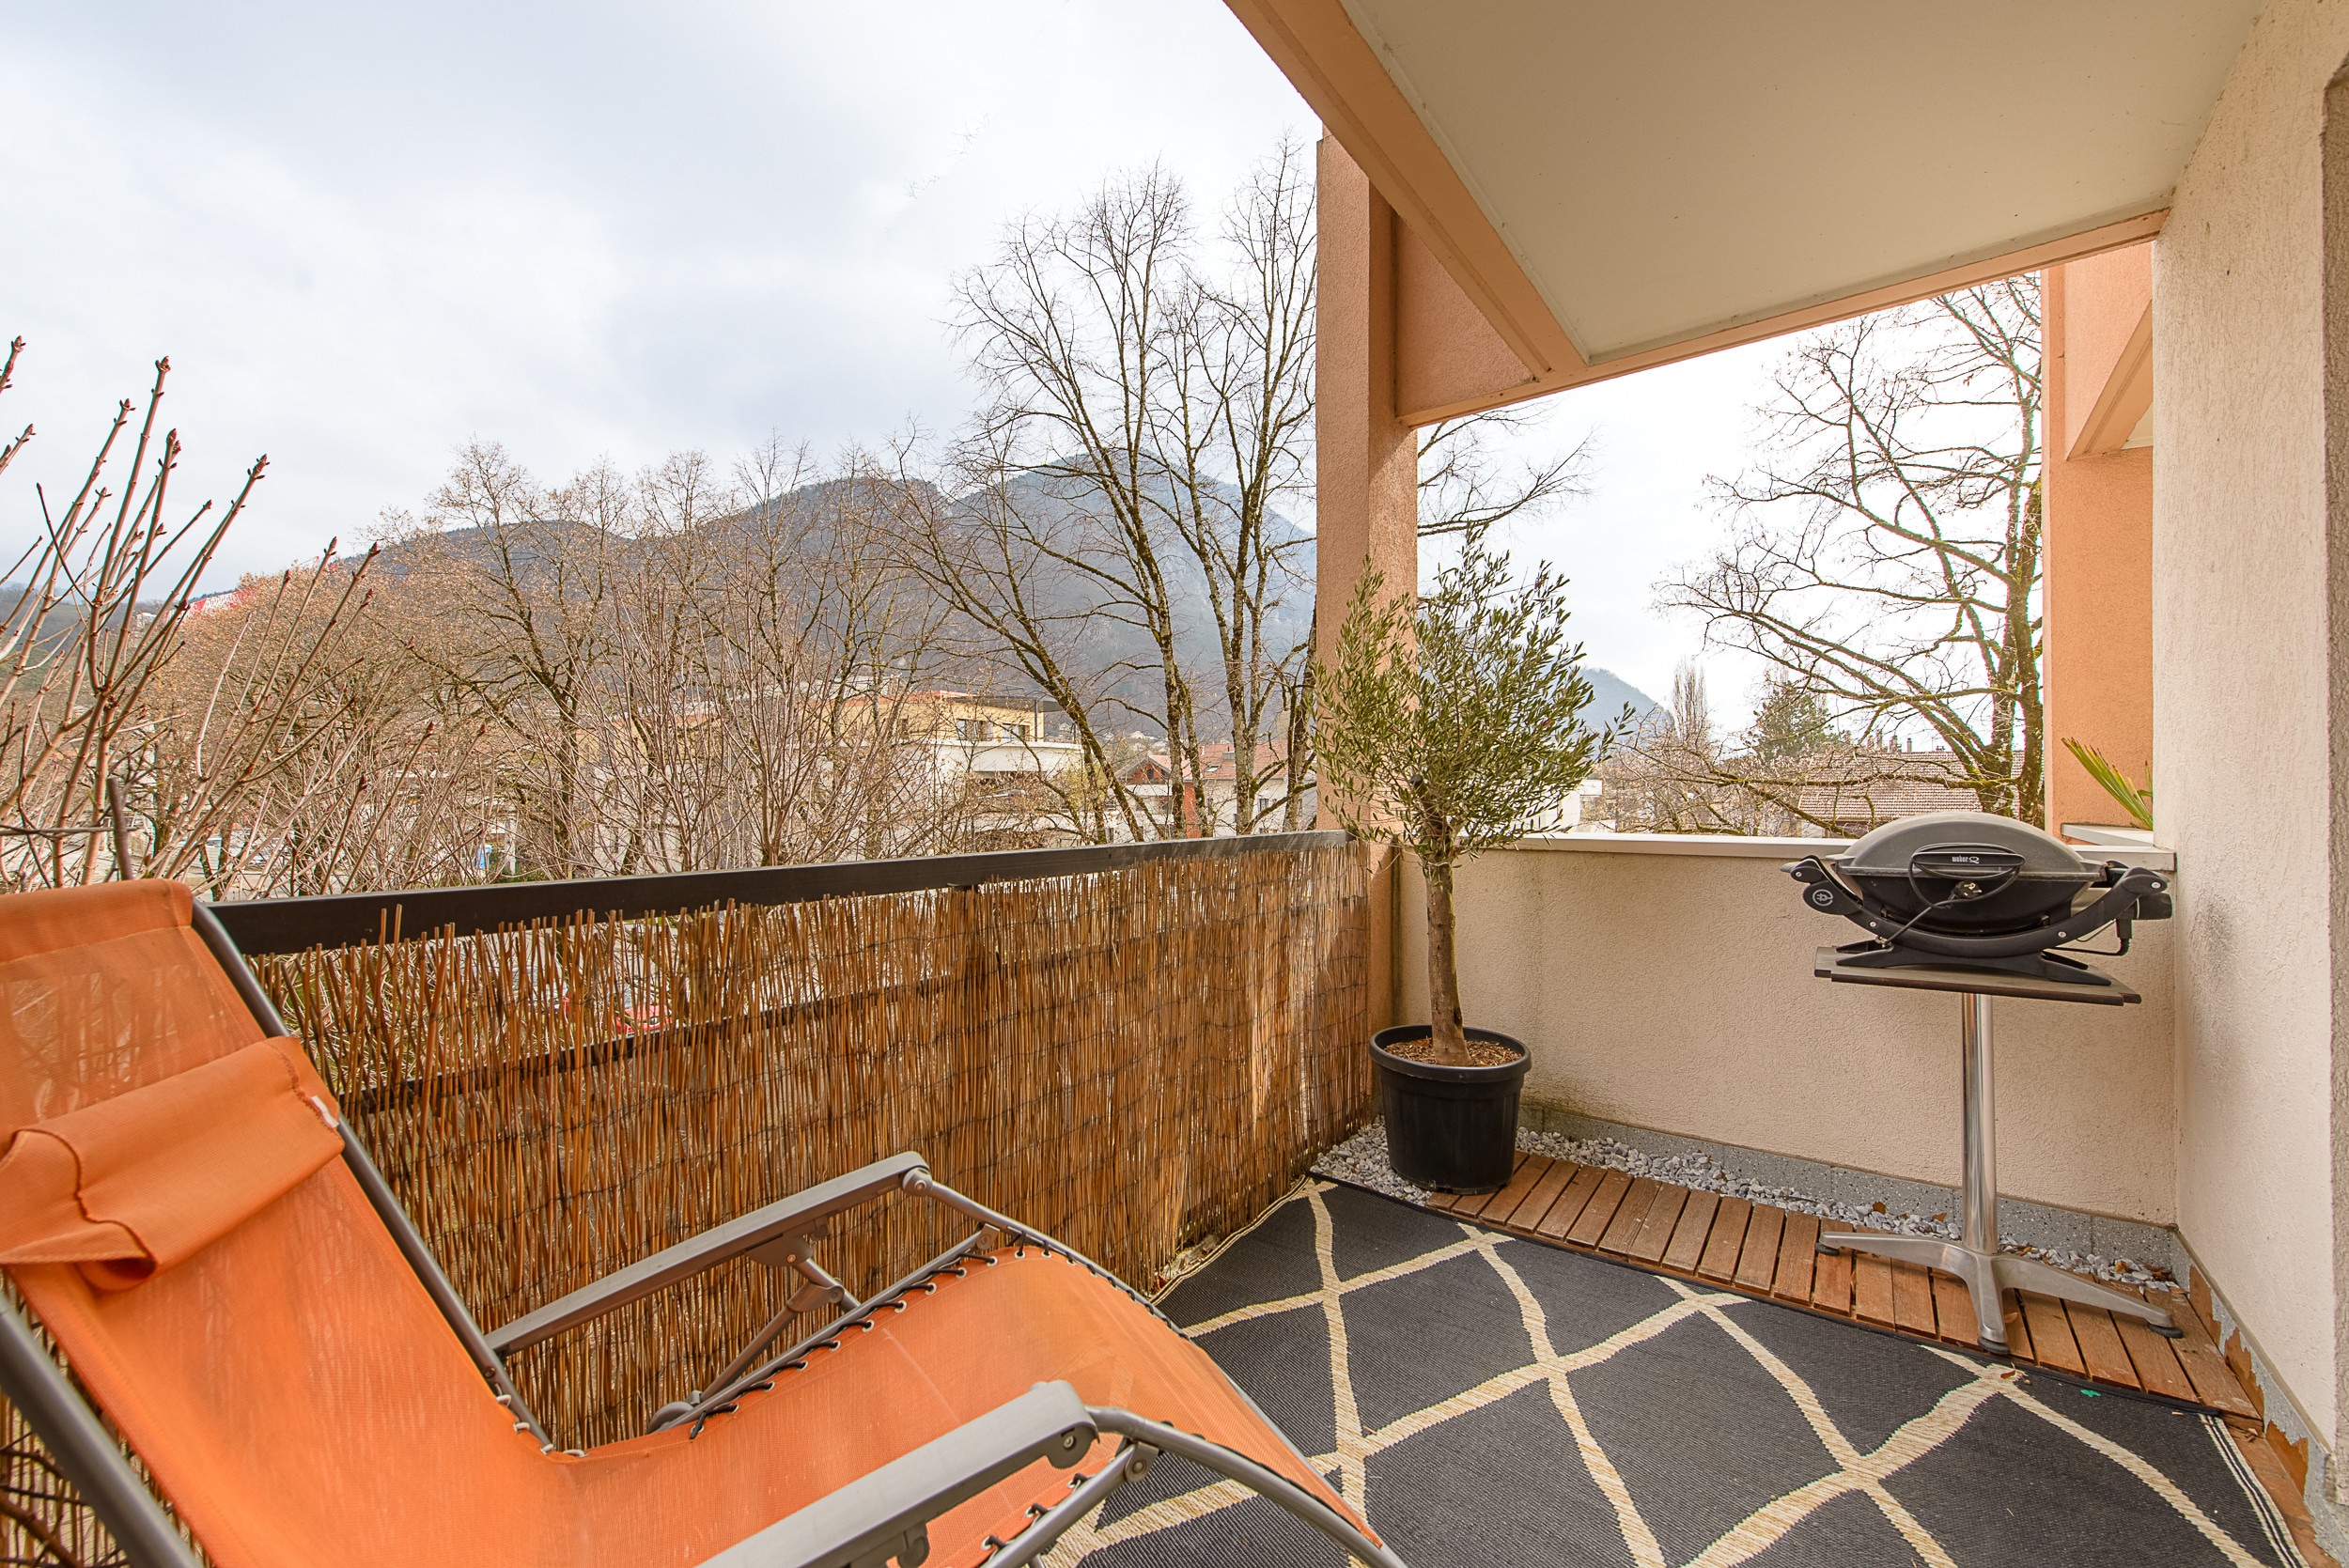 Terrace with plancha, garden furniture and mountain views - facing east and measuring 129 sqf.  Enjoy tasty grilled dishes prepared on the barbecue while admiring the panoramic view of the surrounding area!